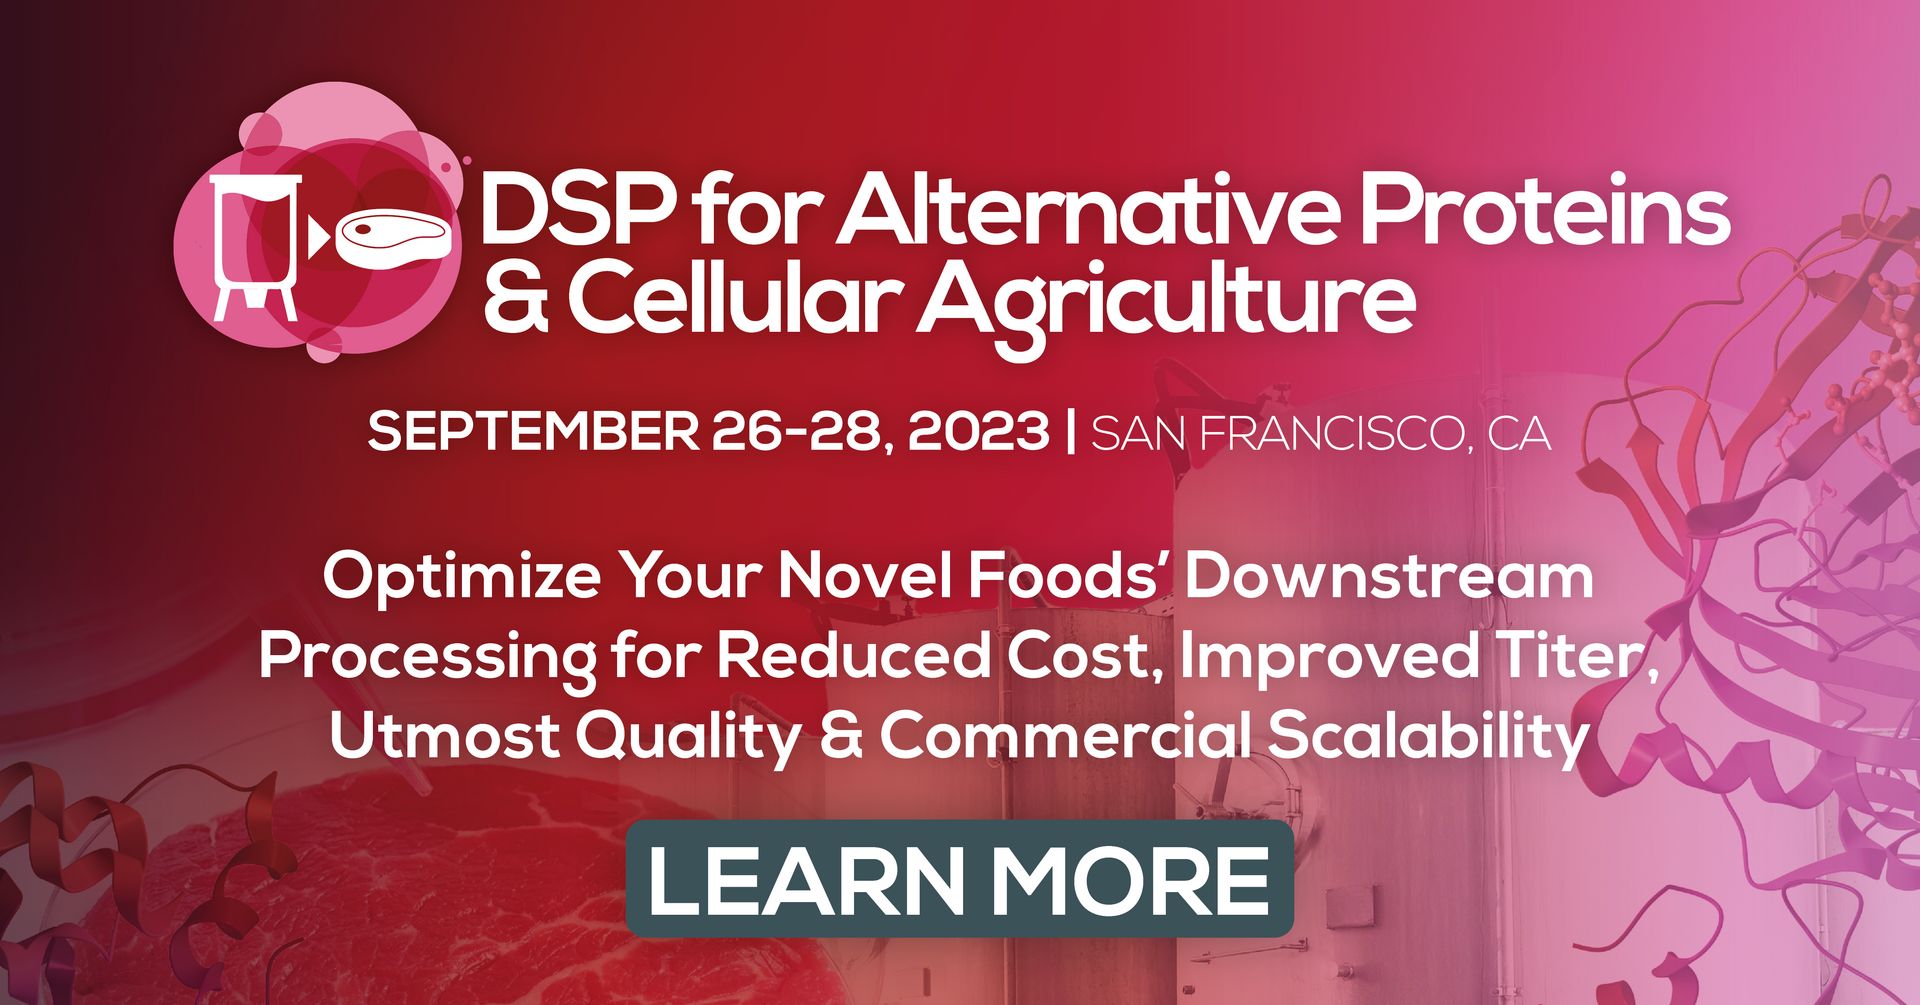 Downstream Processing (DSP) for Alternative Proteins And Cellular Agriculture Summit, San Francisco, California, United States